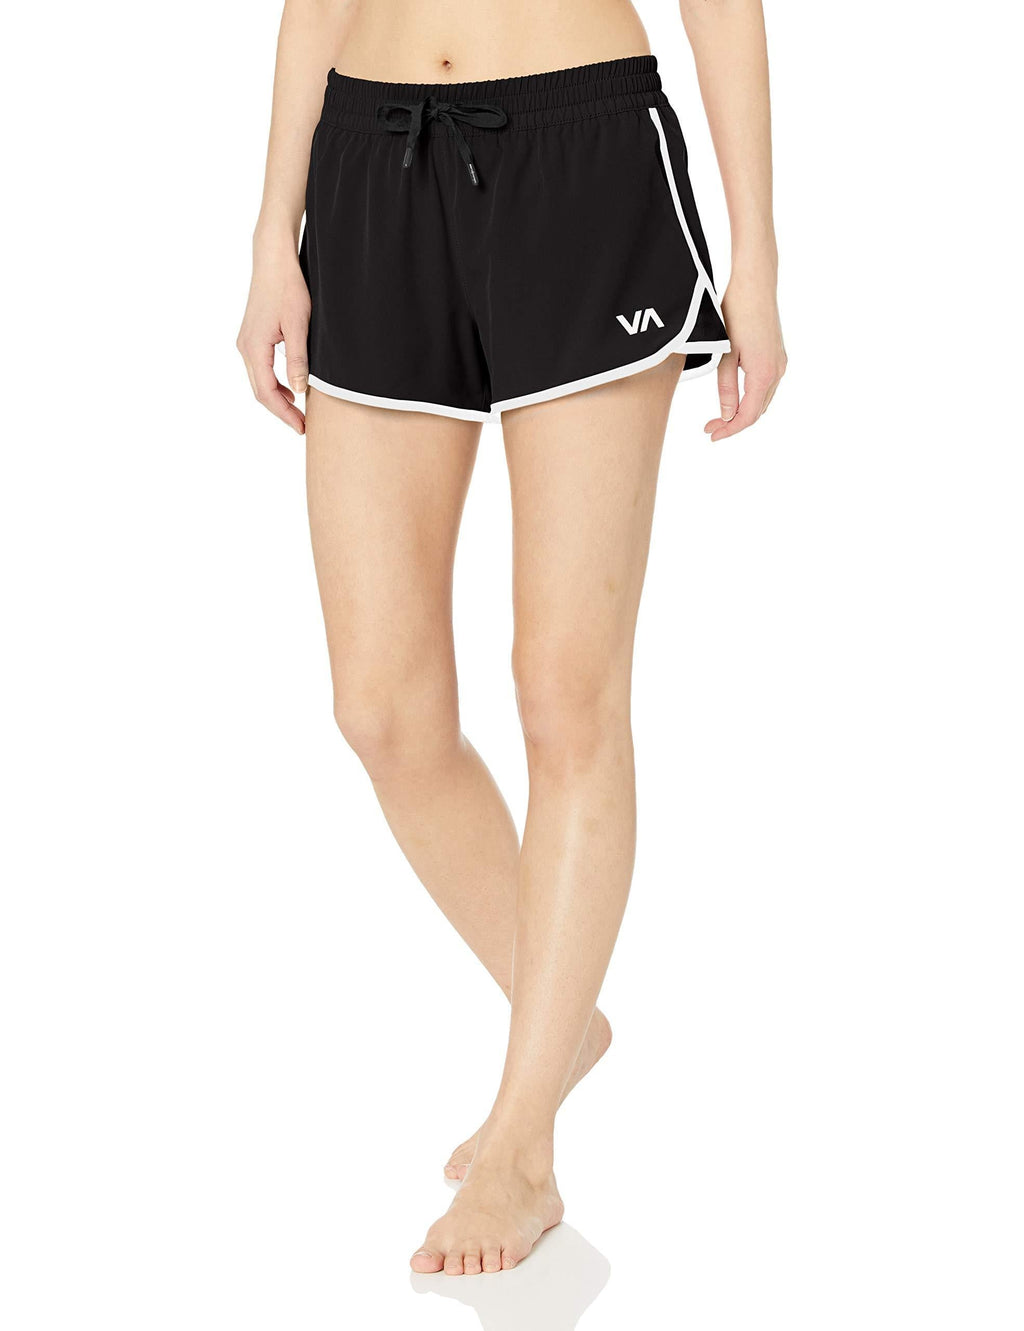 [AUSTRALIA] - RVCA Women's Featherweight Stretch Athlectic Short Small Black 